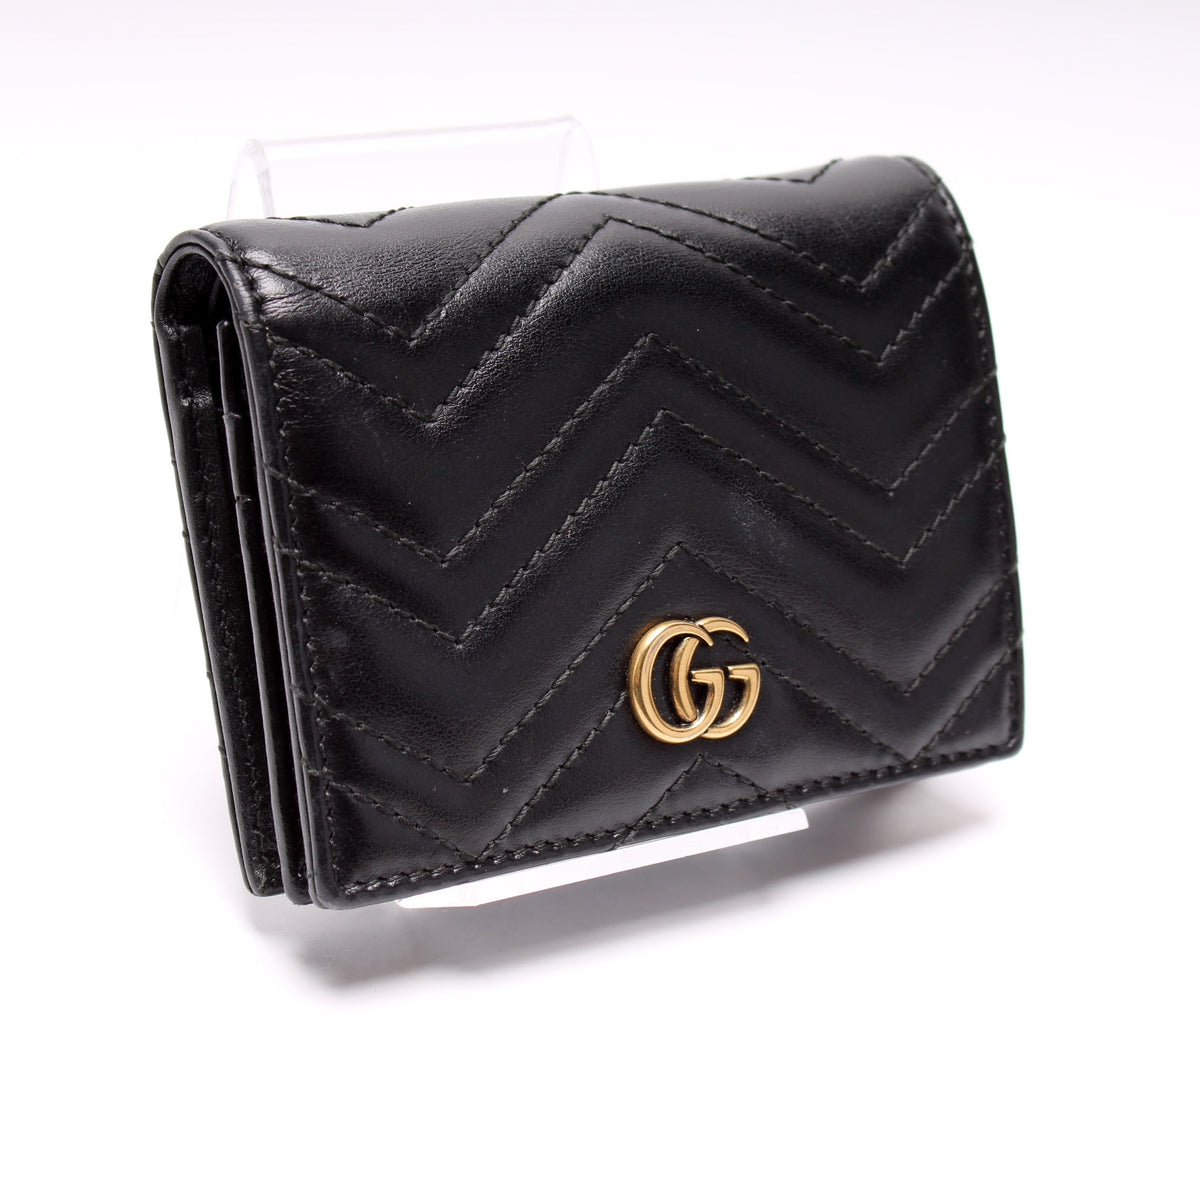 Gucci 'Gg Marmont' Small Wallet in Gray